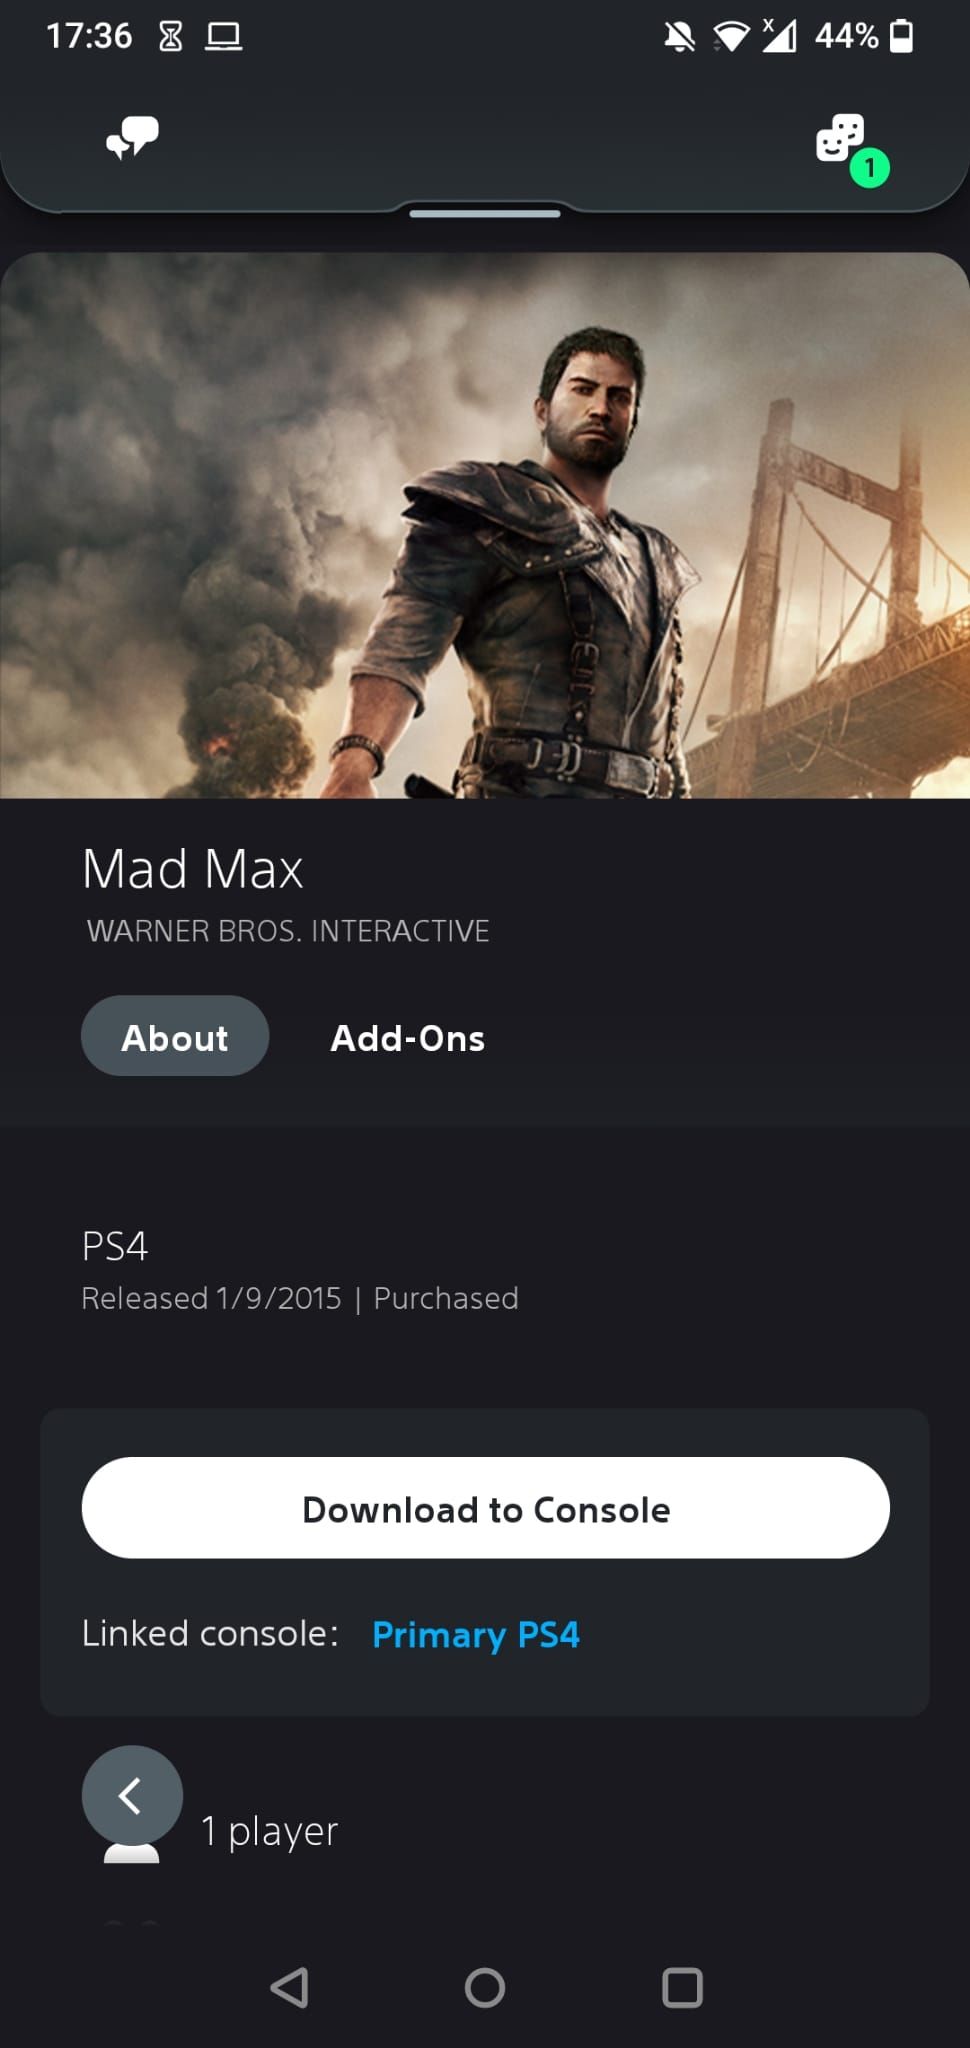 The Mad Max game page on the PS App on Android